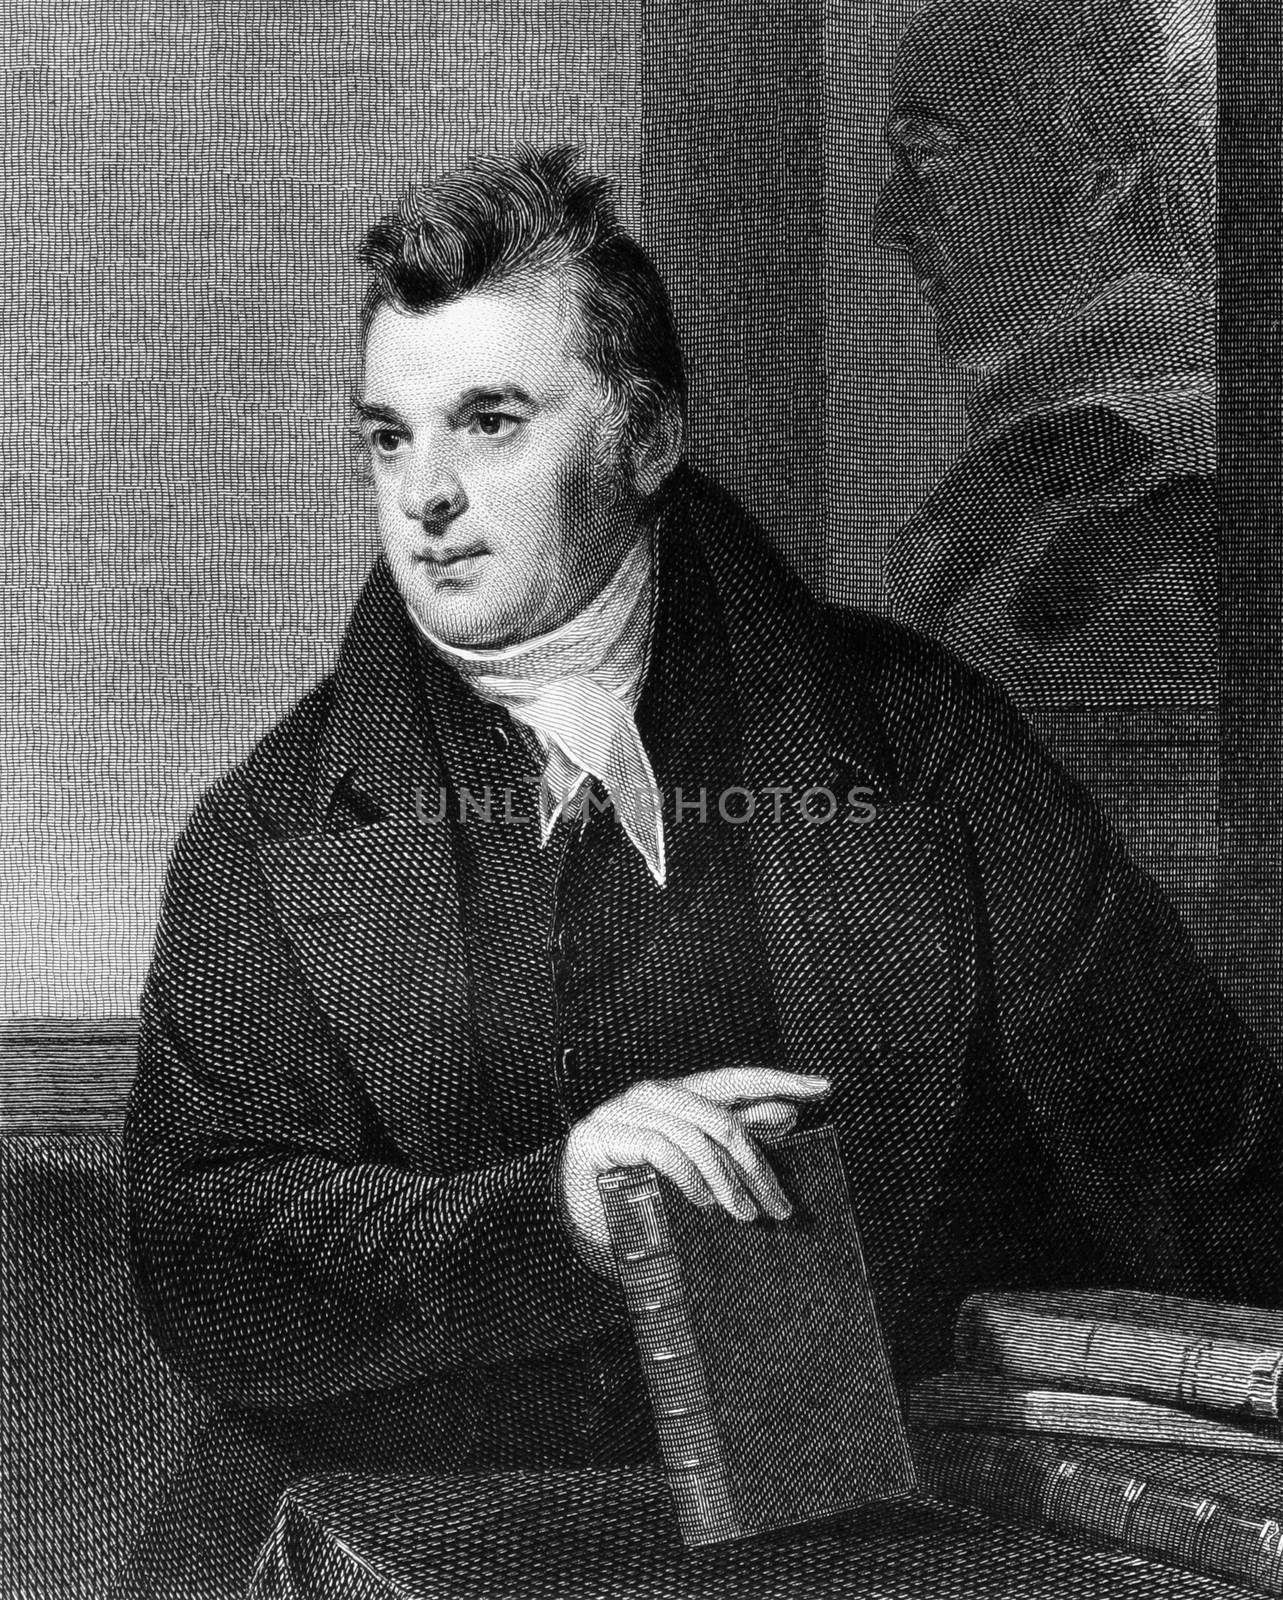 David Hosack (1769-1835) on engraving from 1835. Noted physician, botanist and educator. Engraved by A.B.Durrand and published in''National Portrait Gallery of Distinguished Americans Volume II'',USA,1835.